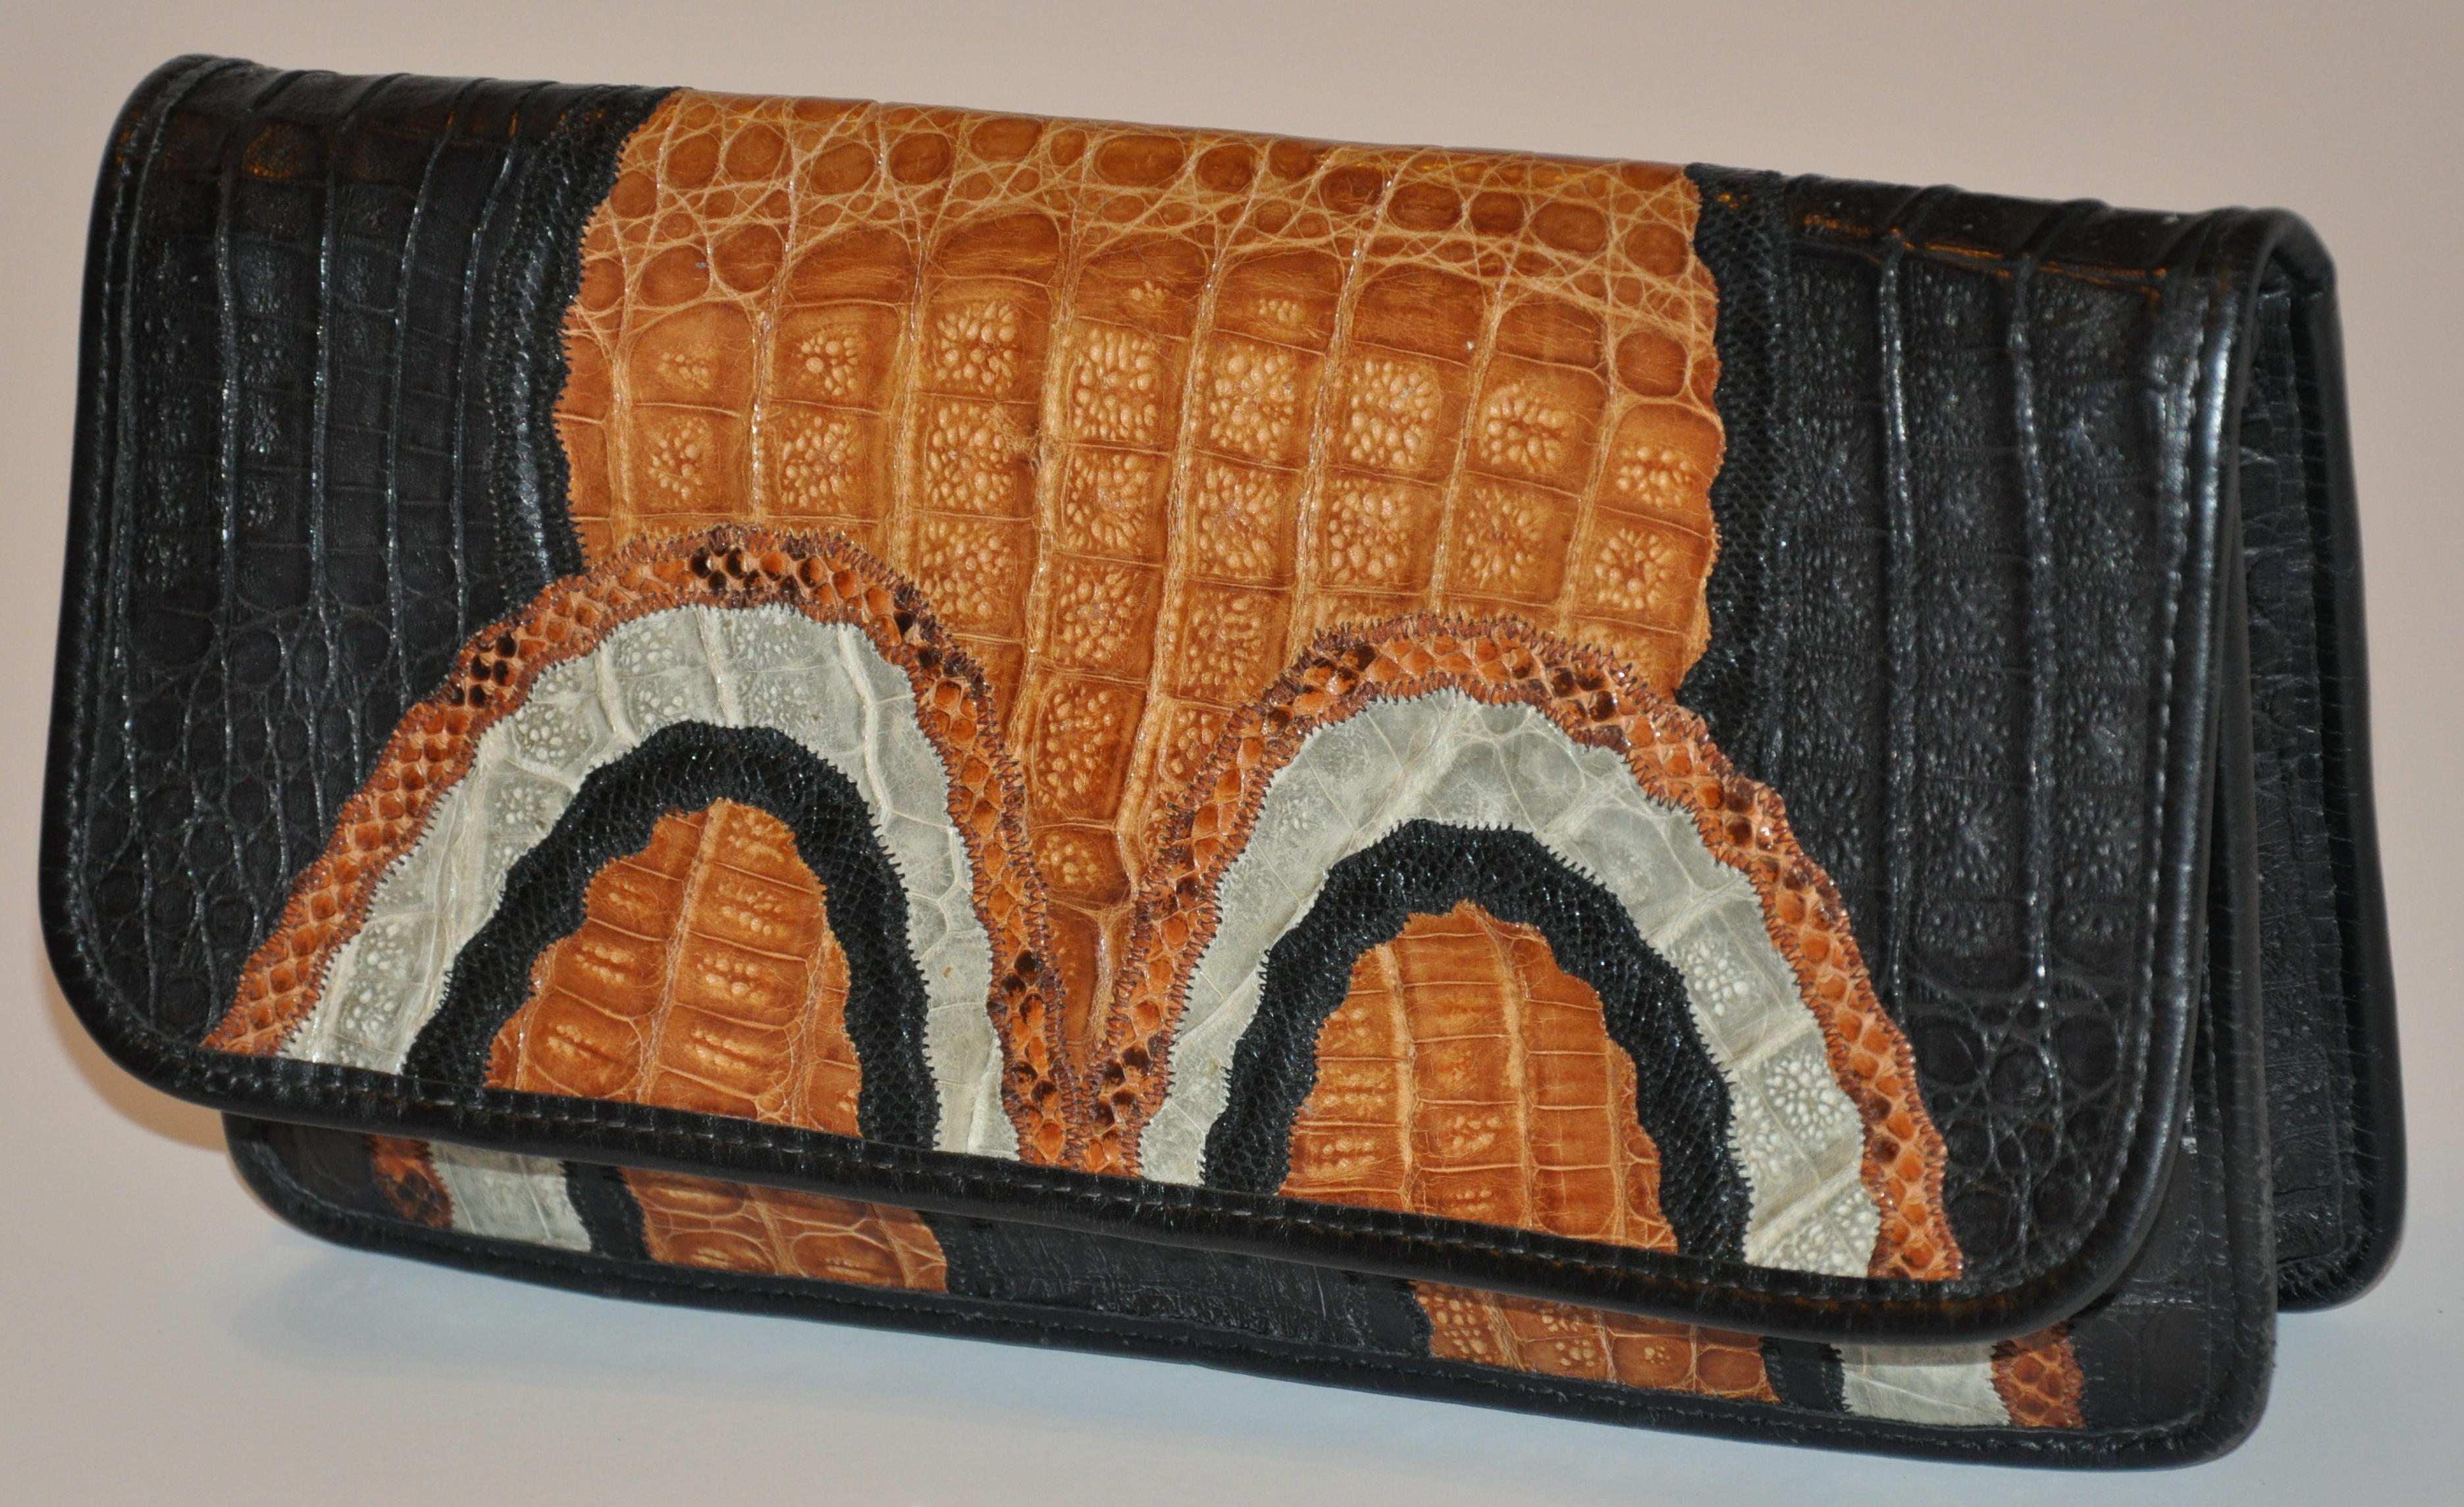        Carlos Falchi wonderfully detailed multi-color clutch and optional shoulder bag accented with Pylon, snake, crocodile and alligator skins into a wonderful 